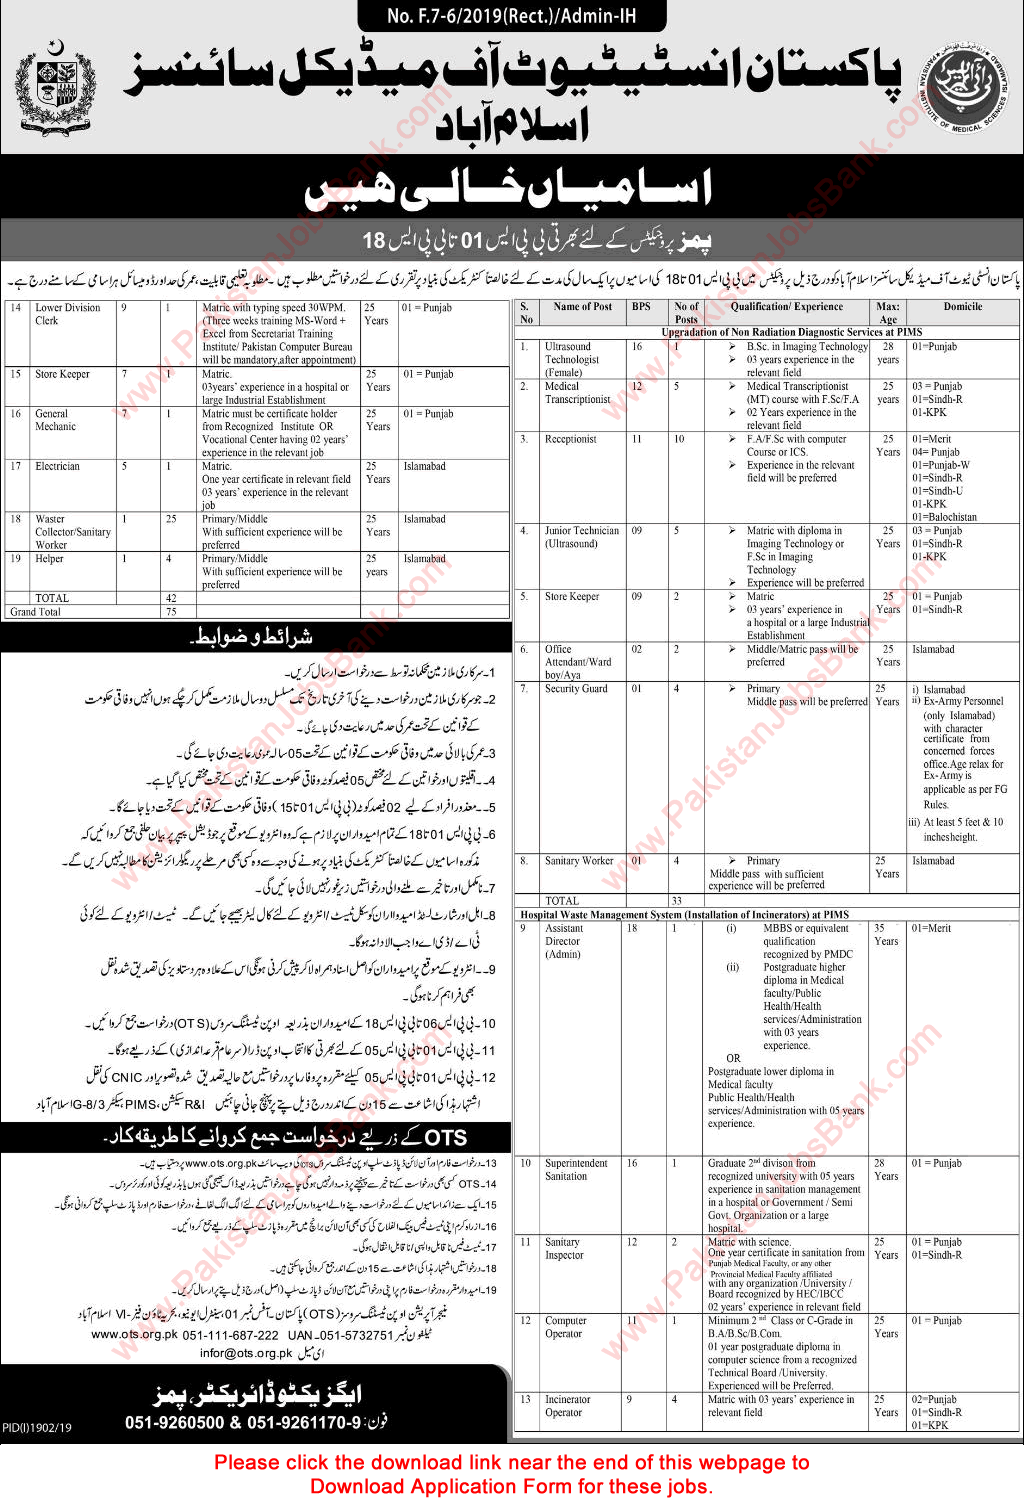 PIMS Hospital Islamabad Jobs 2019 October OTS Application Form Waster Collector, Sanitary Workers & Others Latest